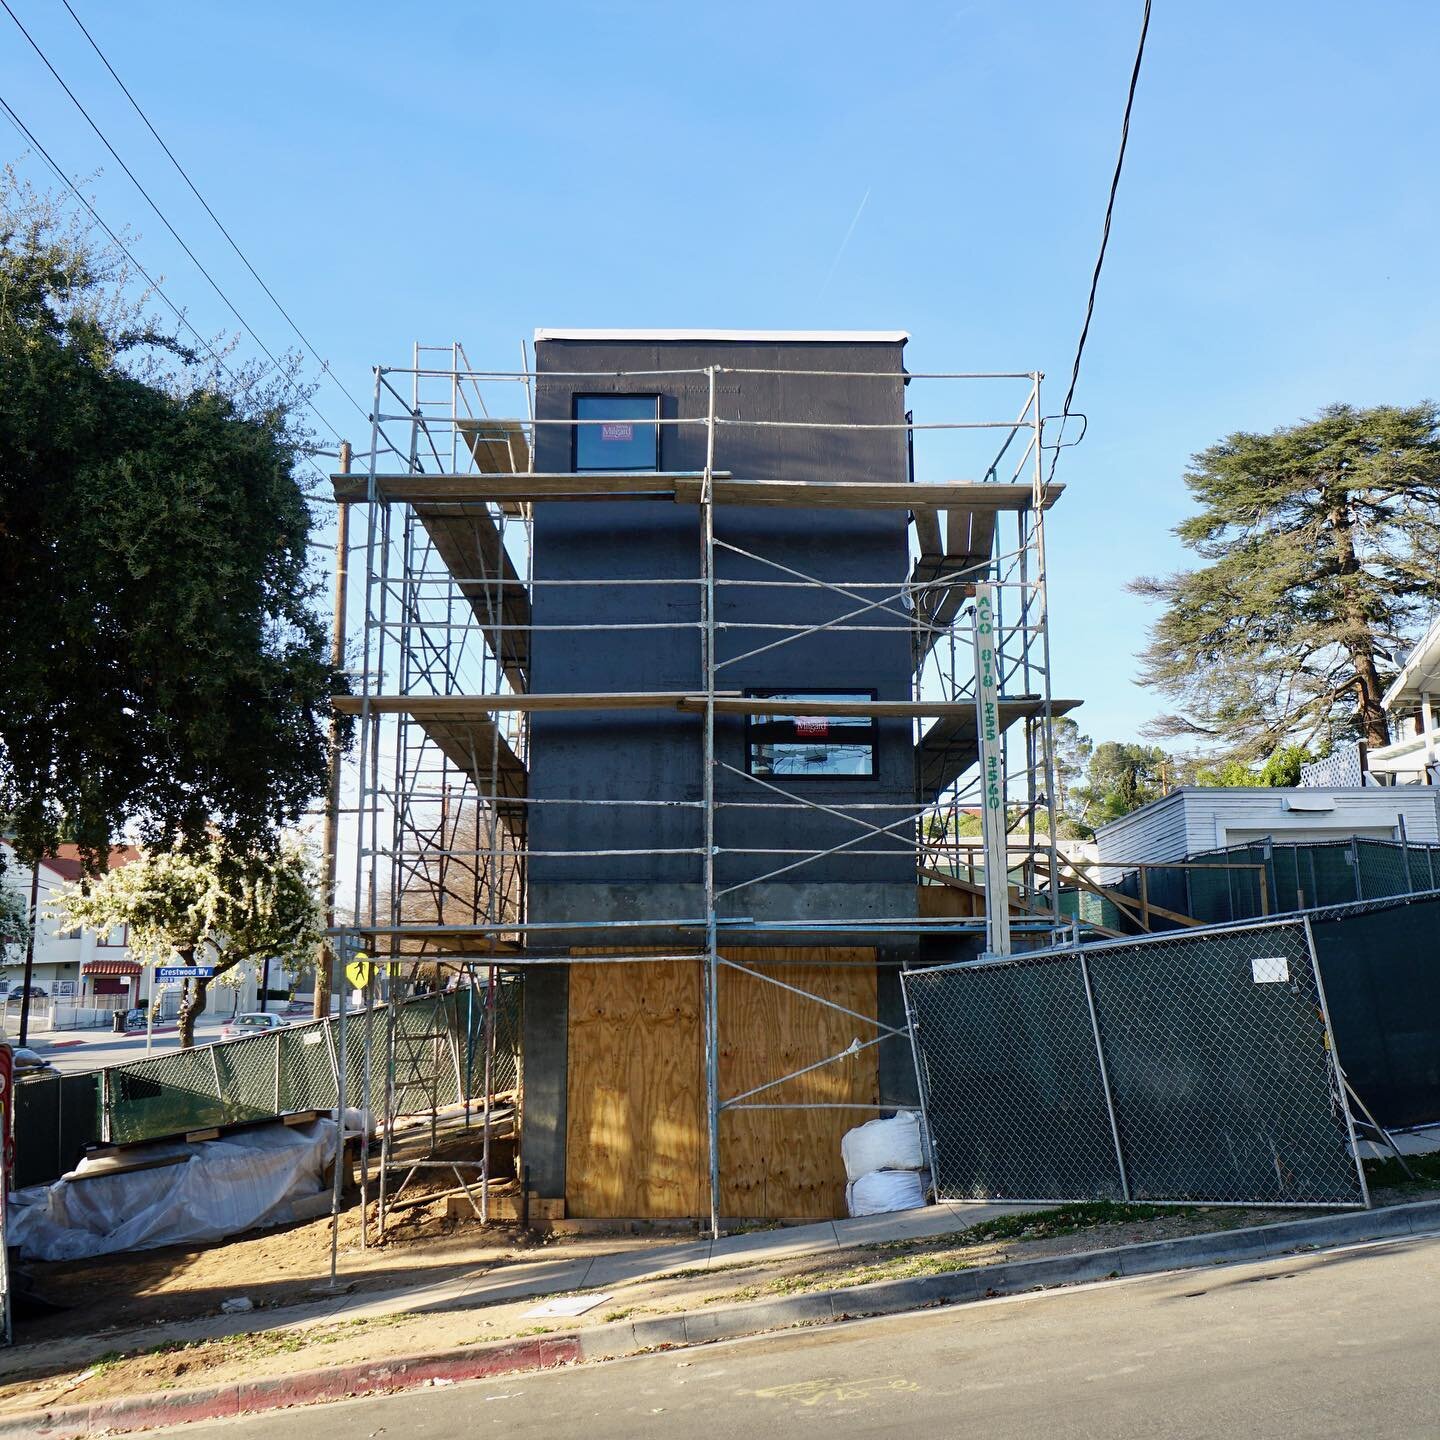 Many months of progress on our 12&rsquo;2&rdquo; wide house on Figueroa. No one expected this project to take so long, but I&rsquo;ll take quality and intention over speed any day.

Not pictured: my emotional deconstruction. Shout out to my therapist